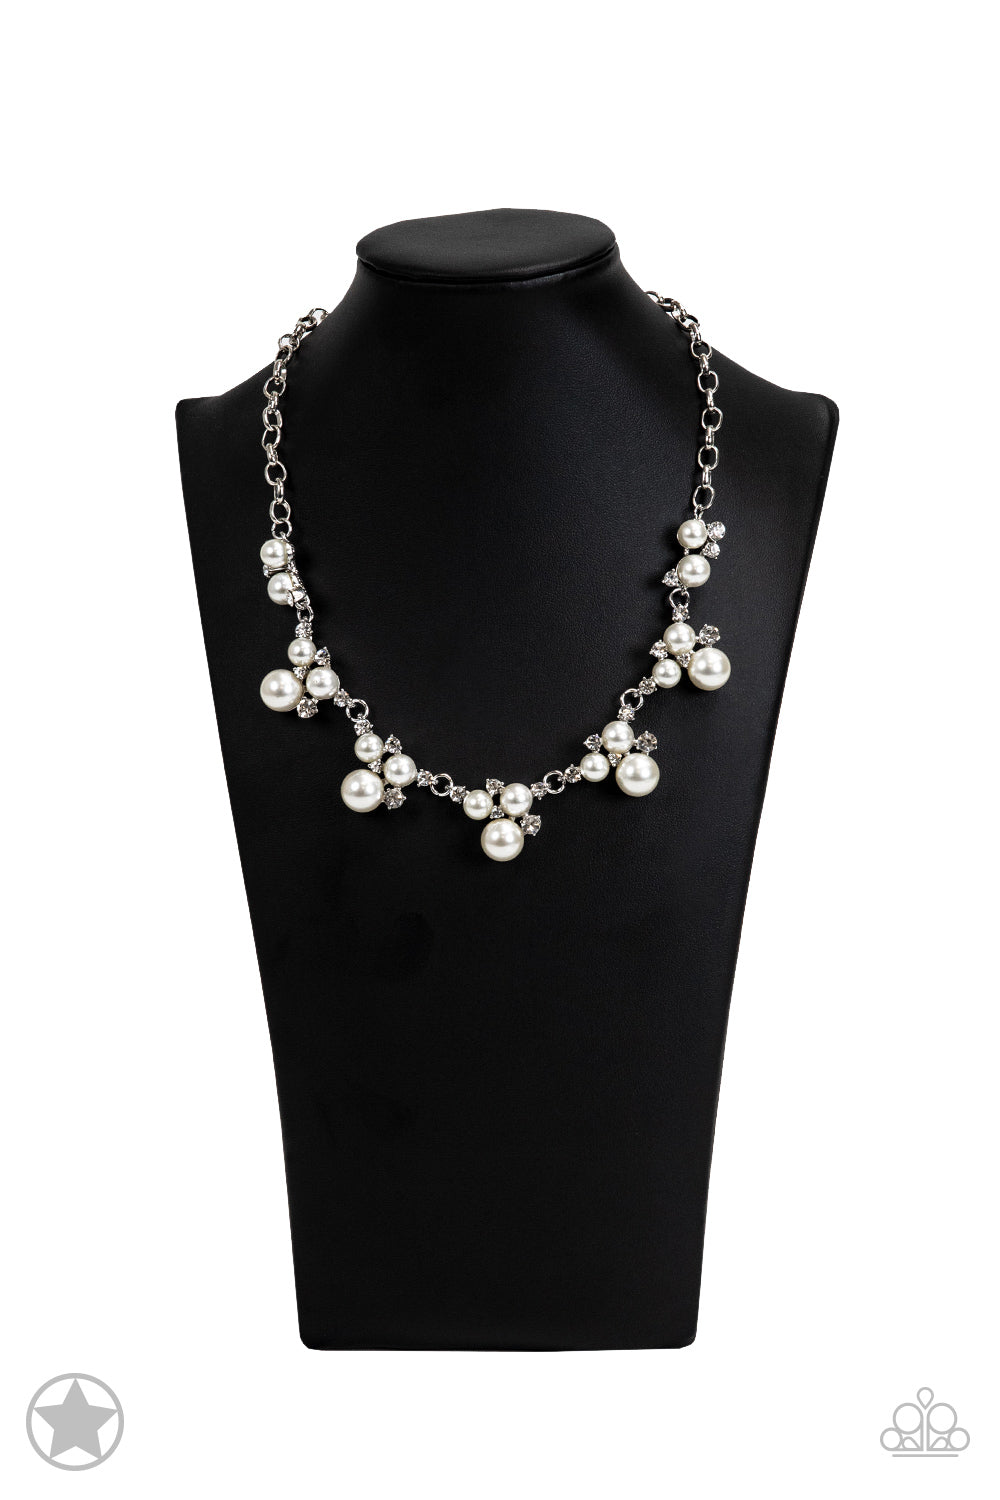 Toast to Perfection - White Rhinestone and Pearl Necklace - Blockbuster